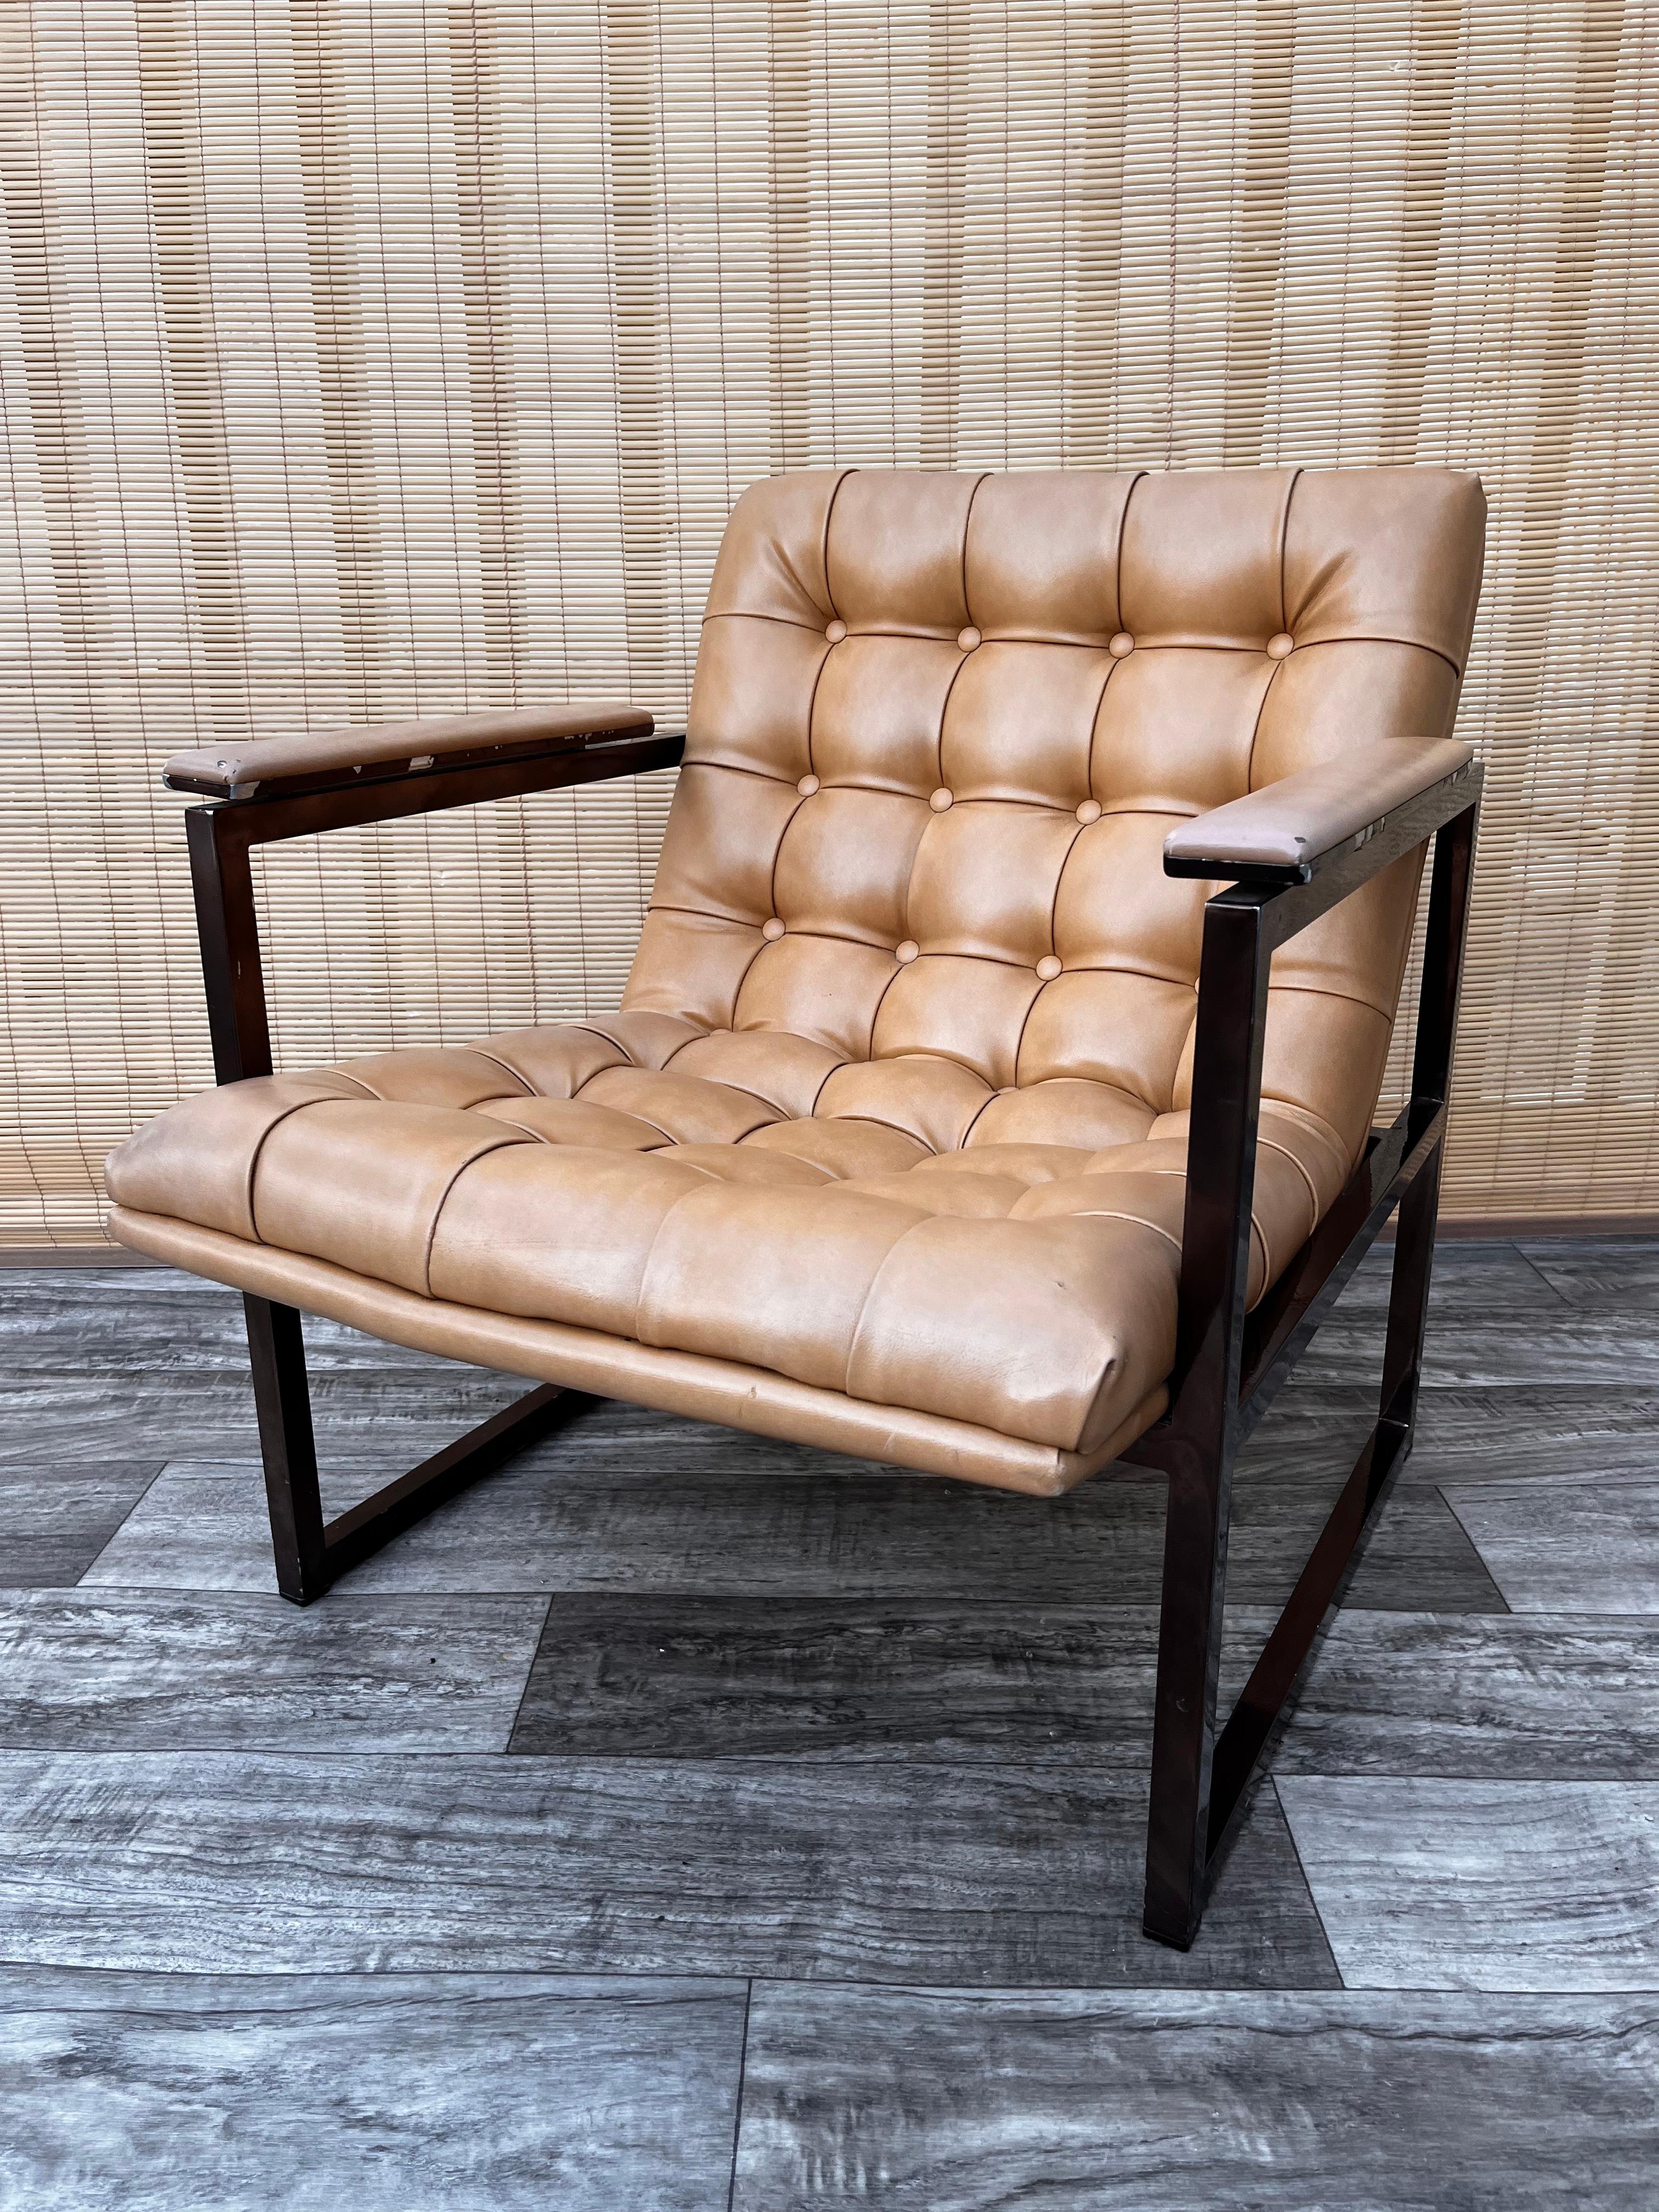 Vintage Mid-Century Modern chrome lounge chair. circa 1970s.
Inspired by Milo Baughman and the Barcelona chair by Mies Van der Rohe's designs.
Features a solid metal frame painted in a bronze color and the original tufted camel color vinyl